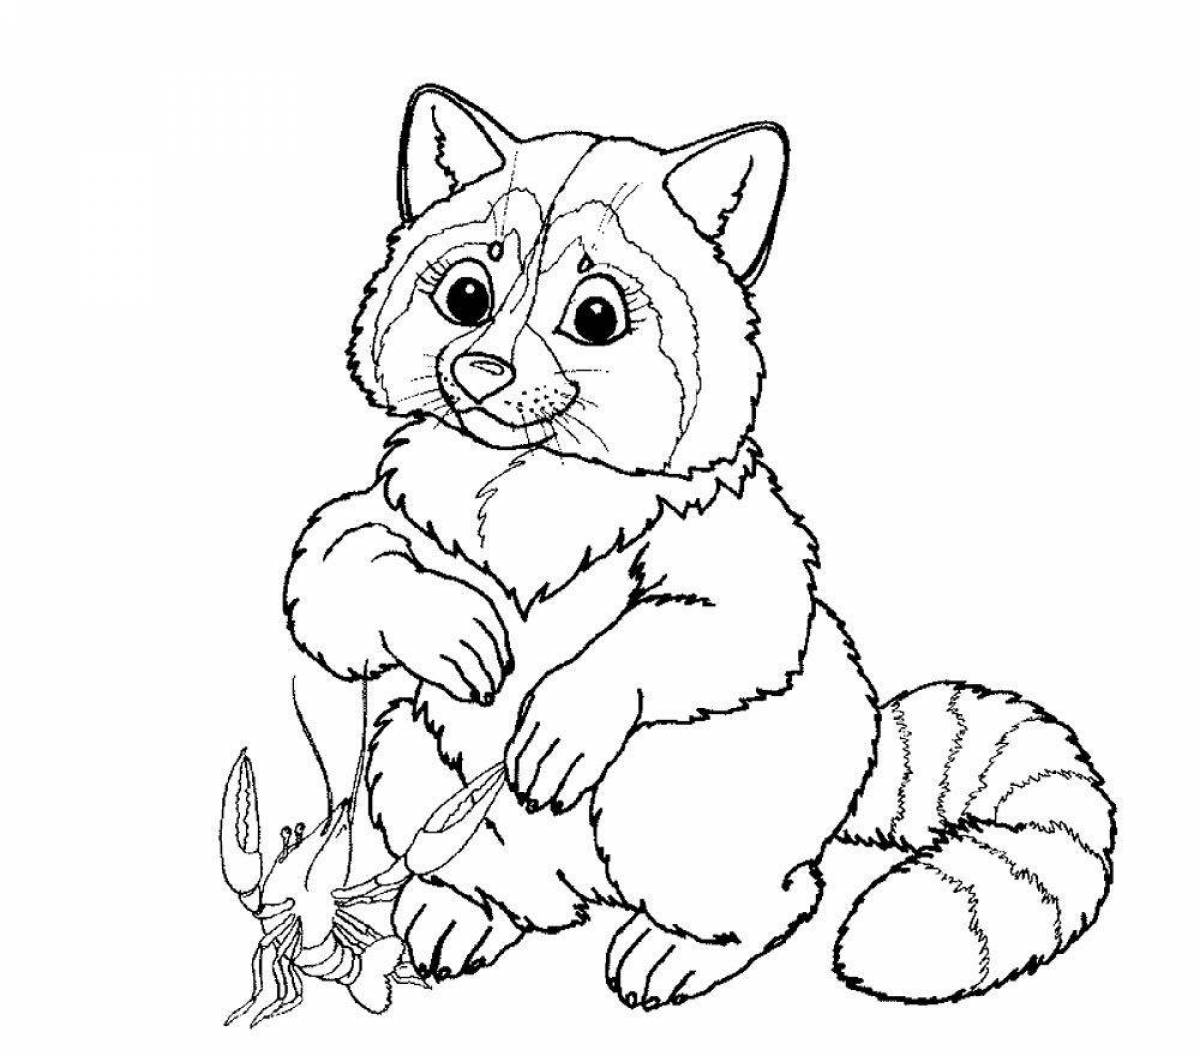 Bright coloring pages of animals and beasts